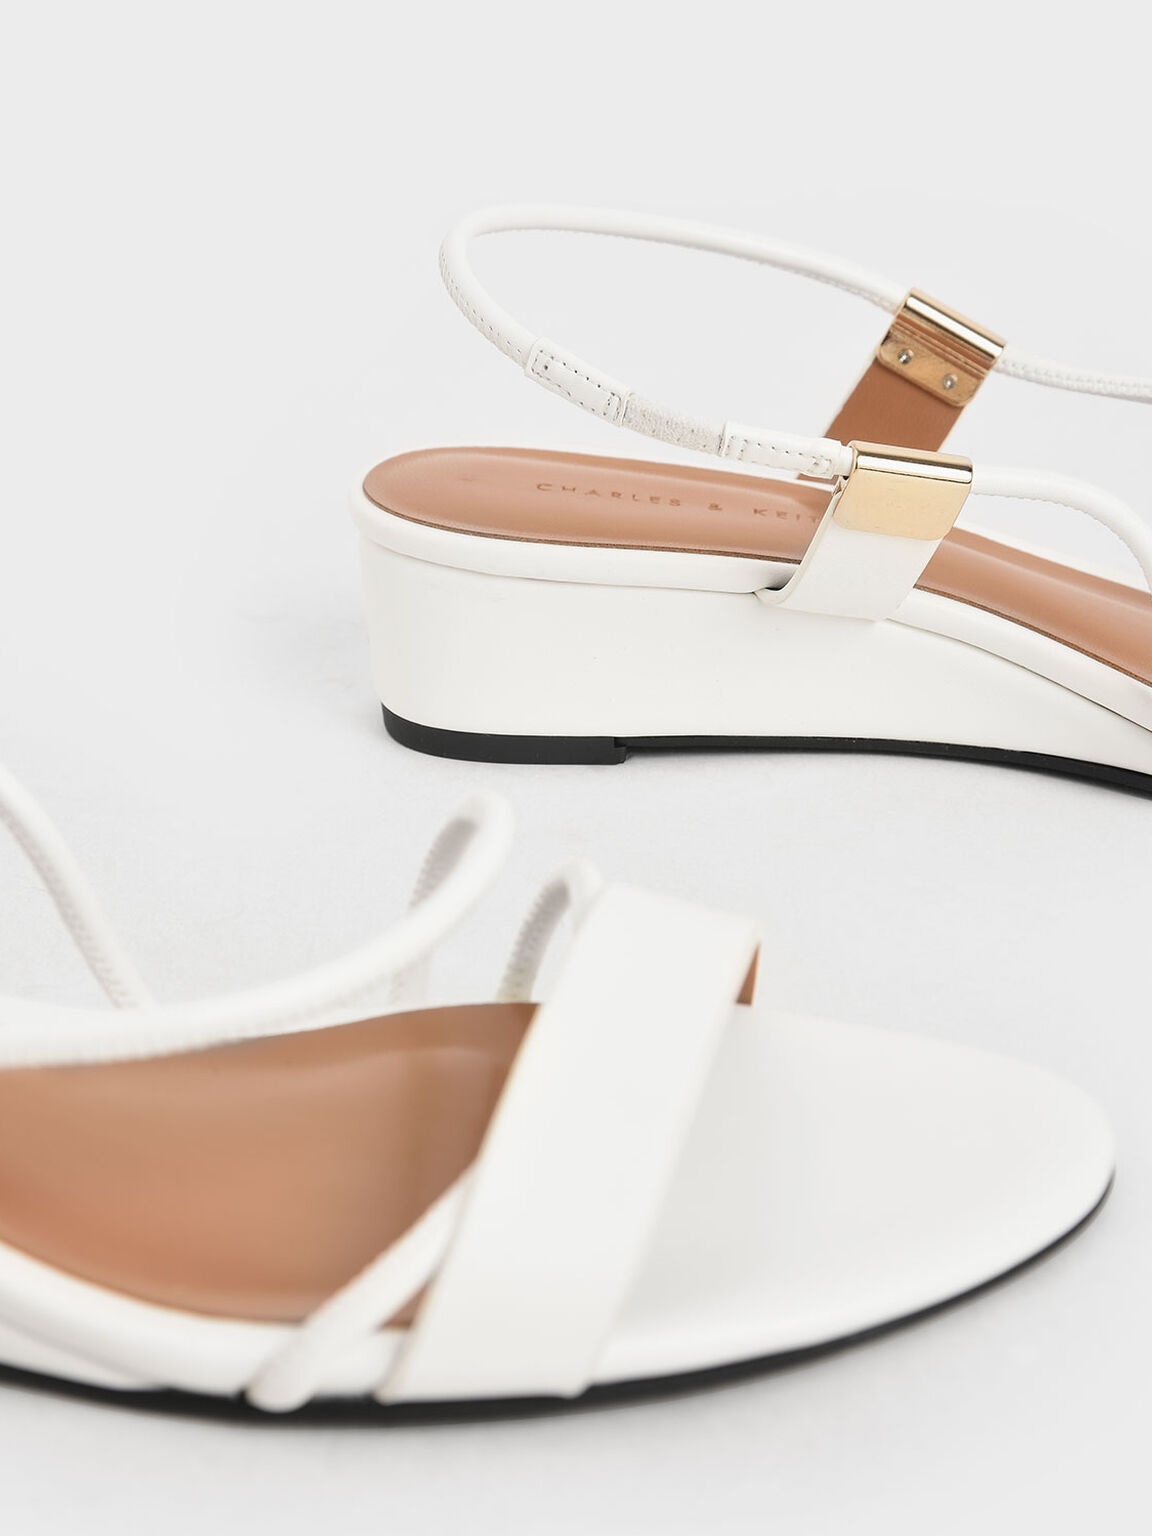 Strappy Slingback Wedges, White, hi-res